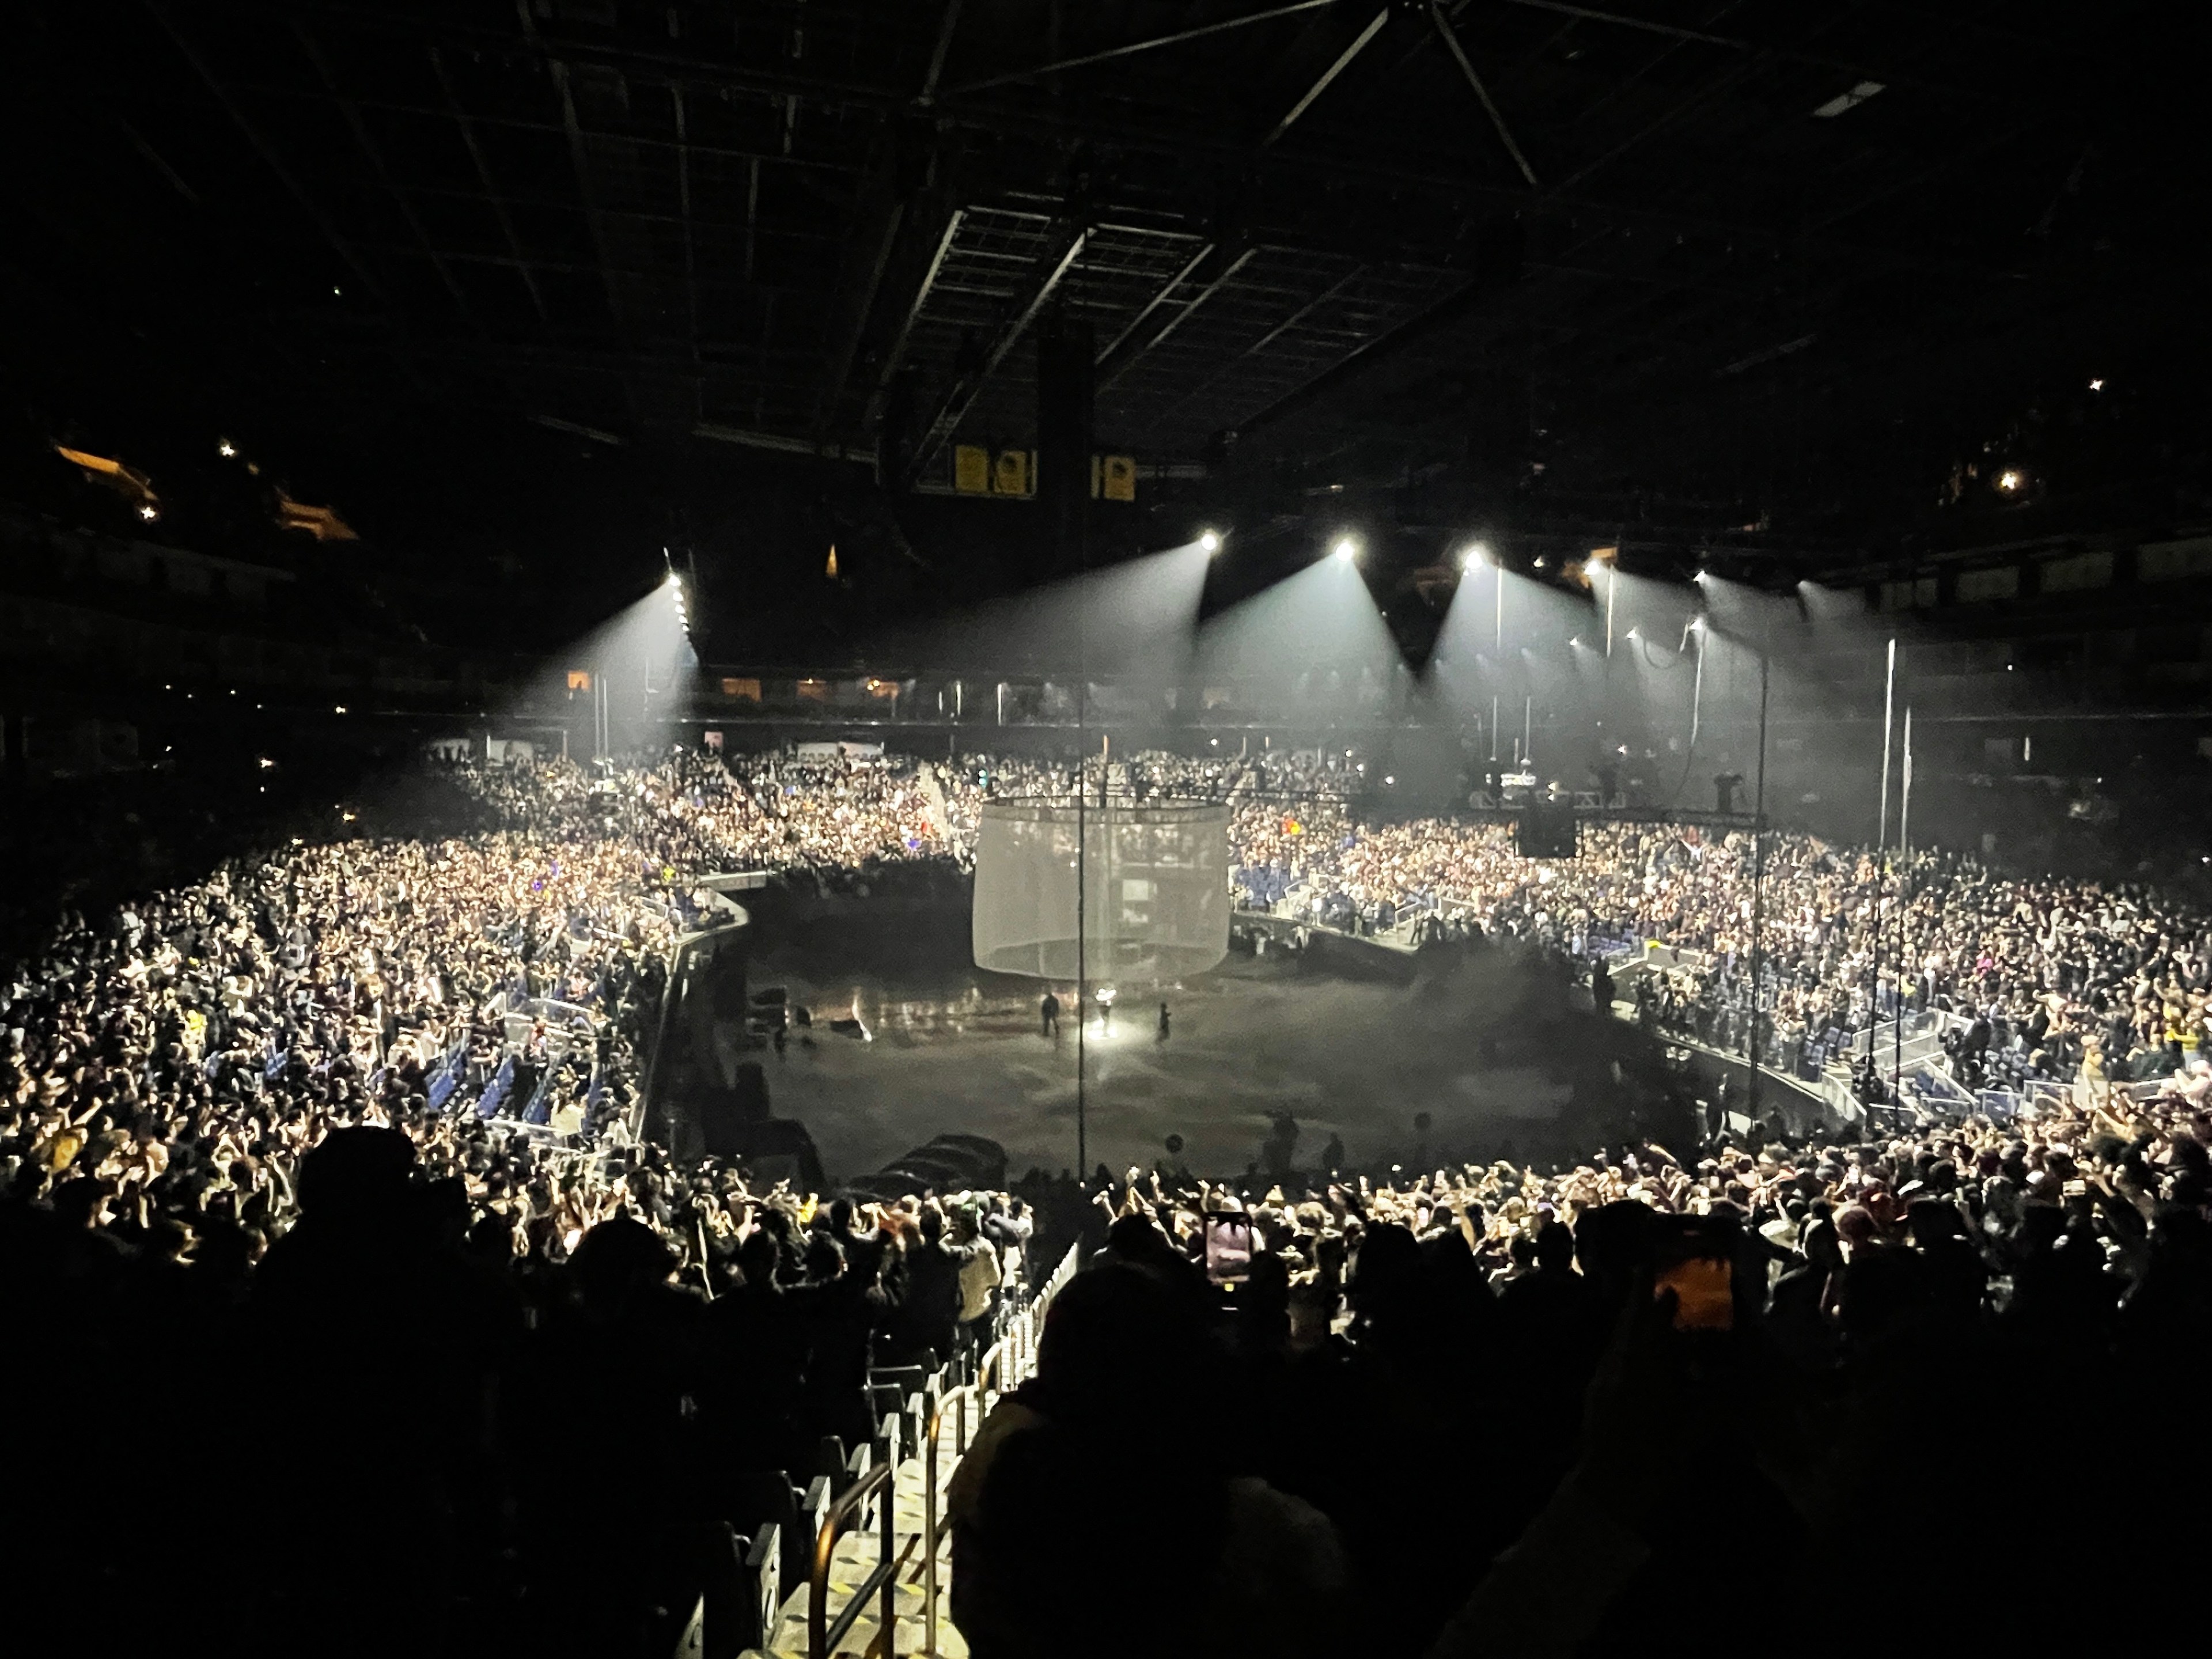 A concert arena filled with a large crowd, lit by stage lights, before or after a performance.